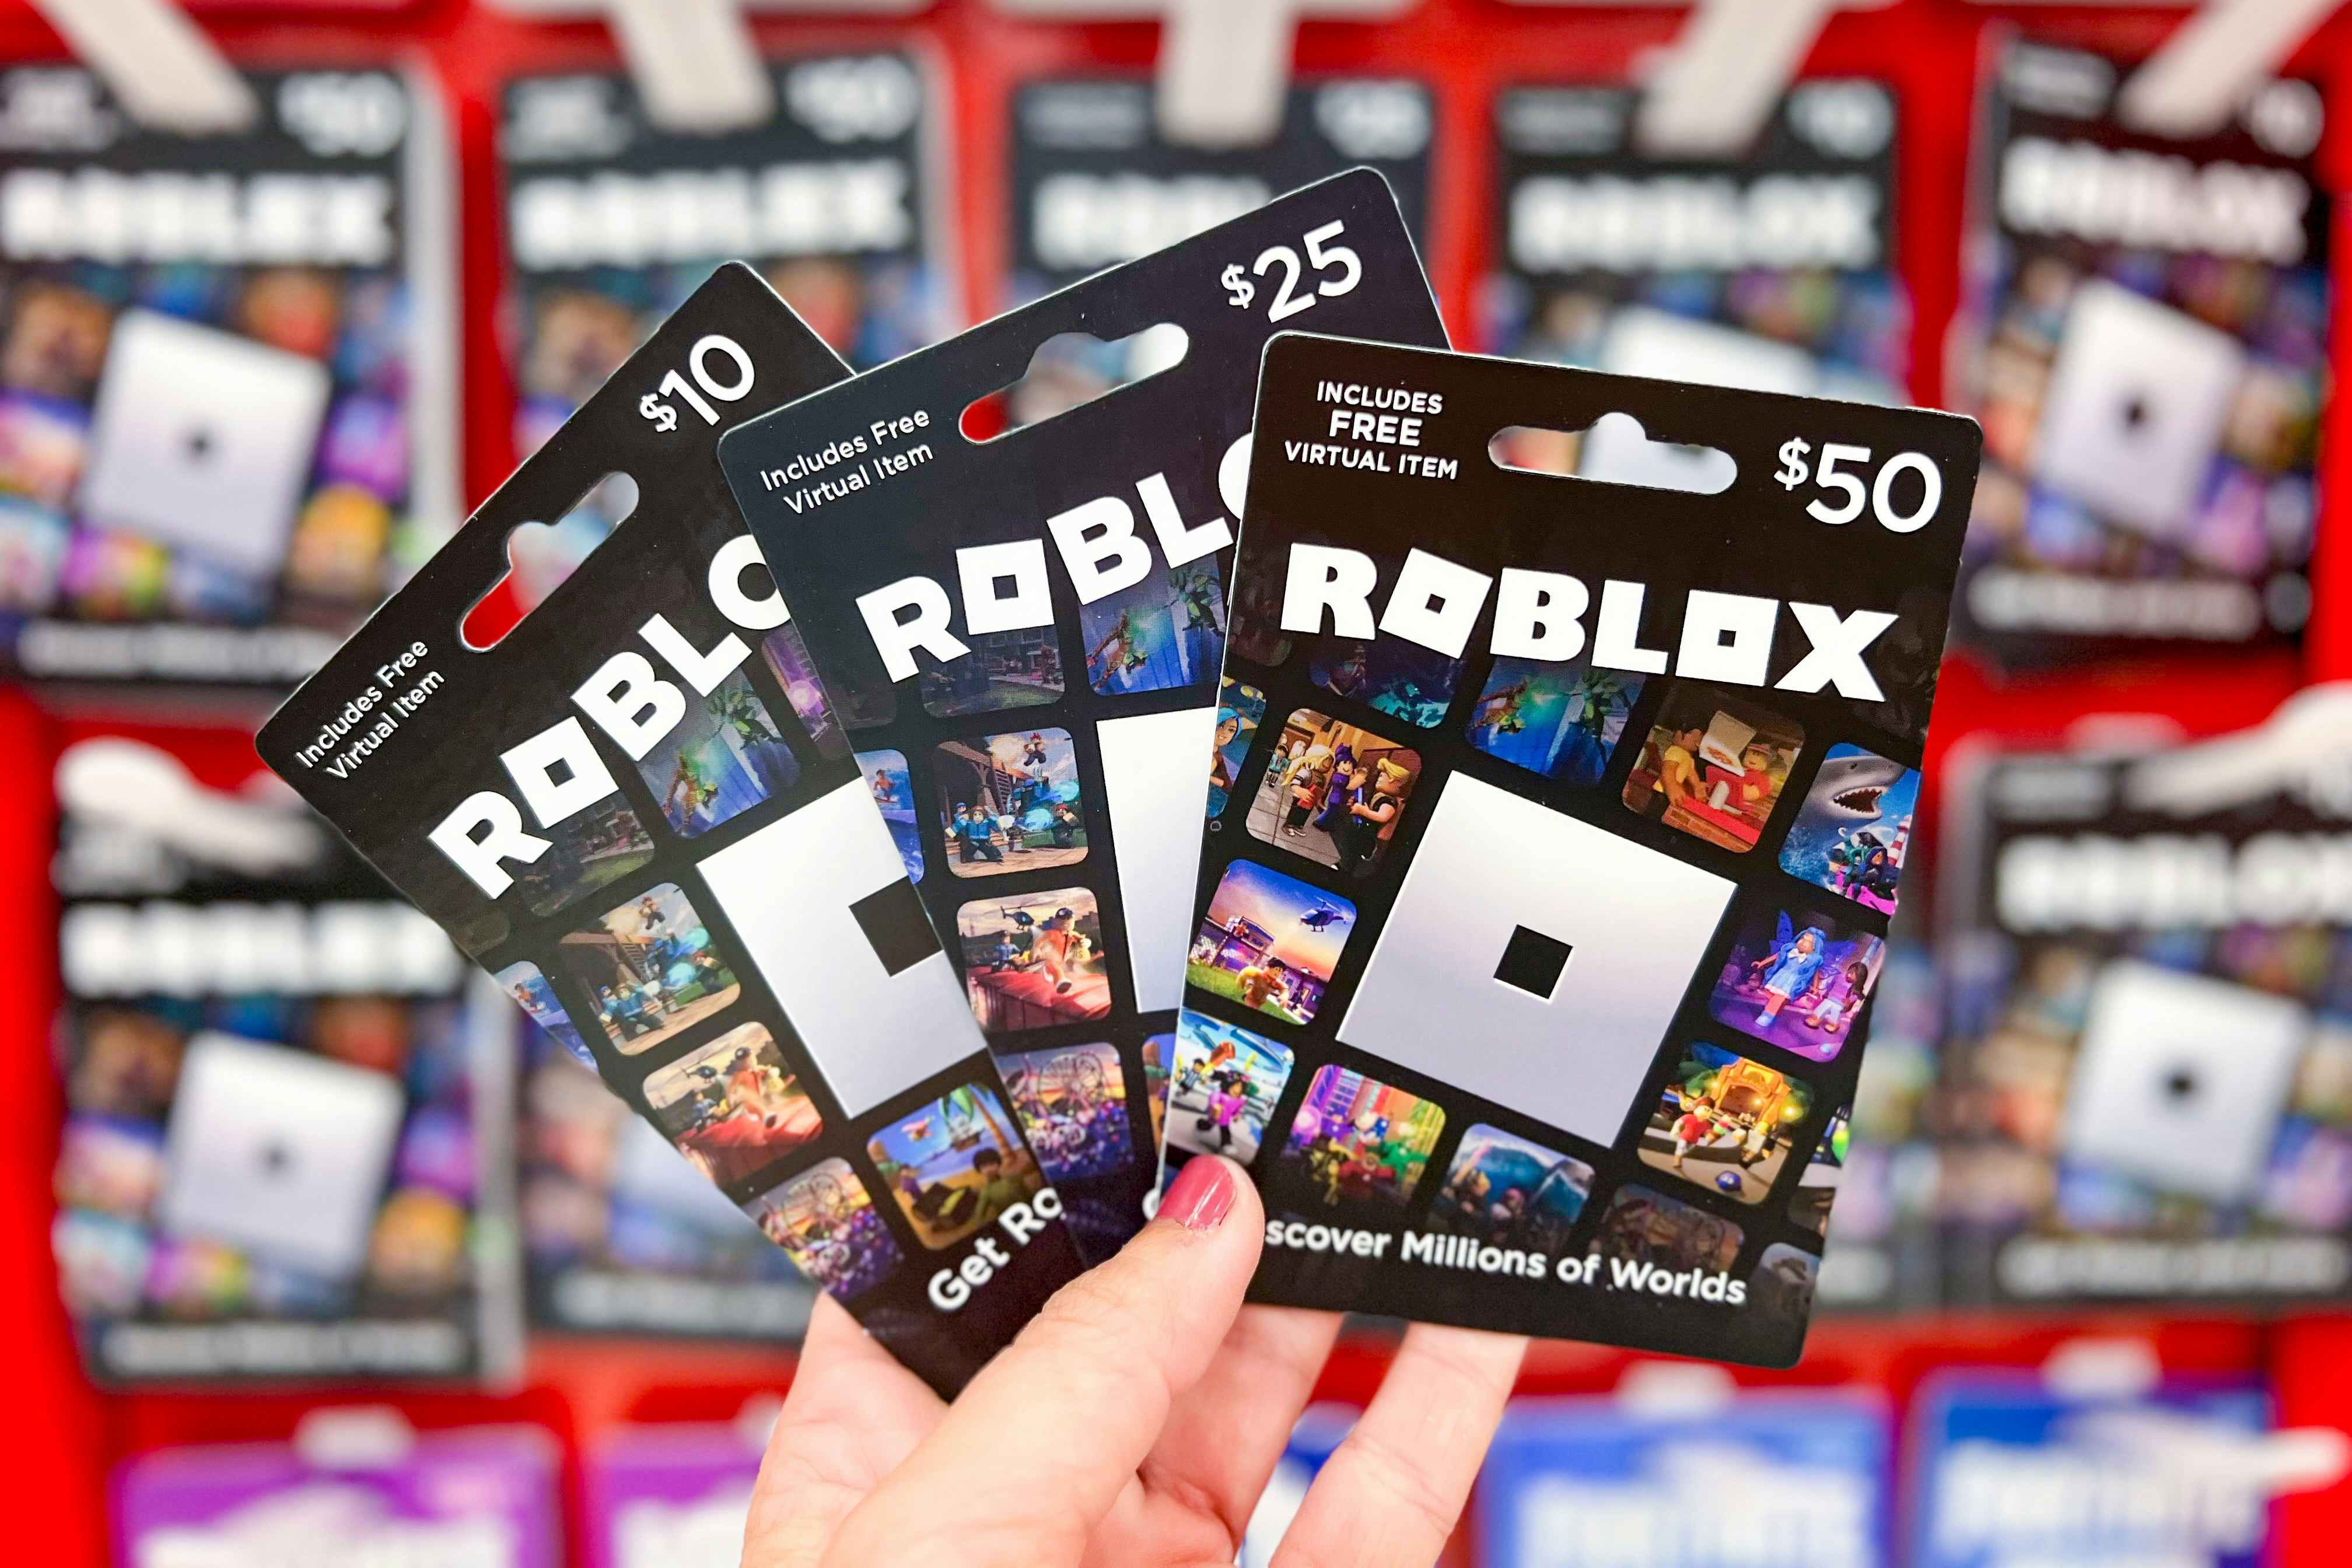 Save 40% on Roblox Gift Cards at Sam's Club (Rare Discount)